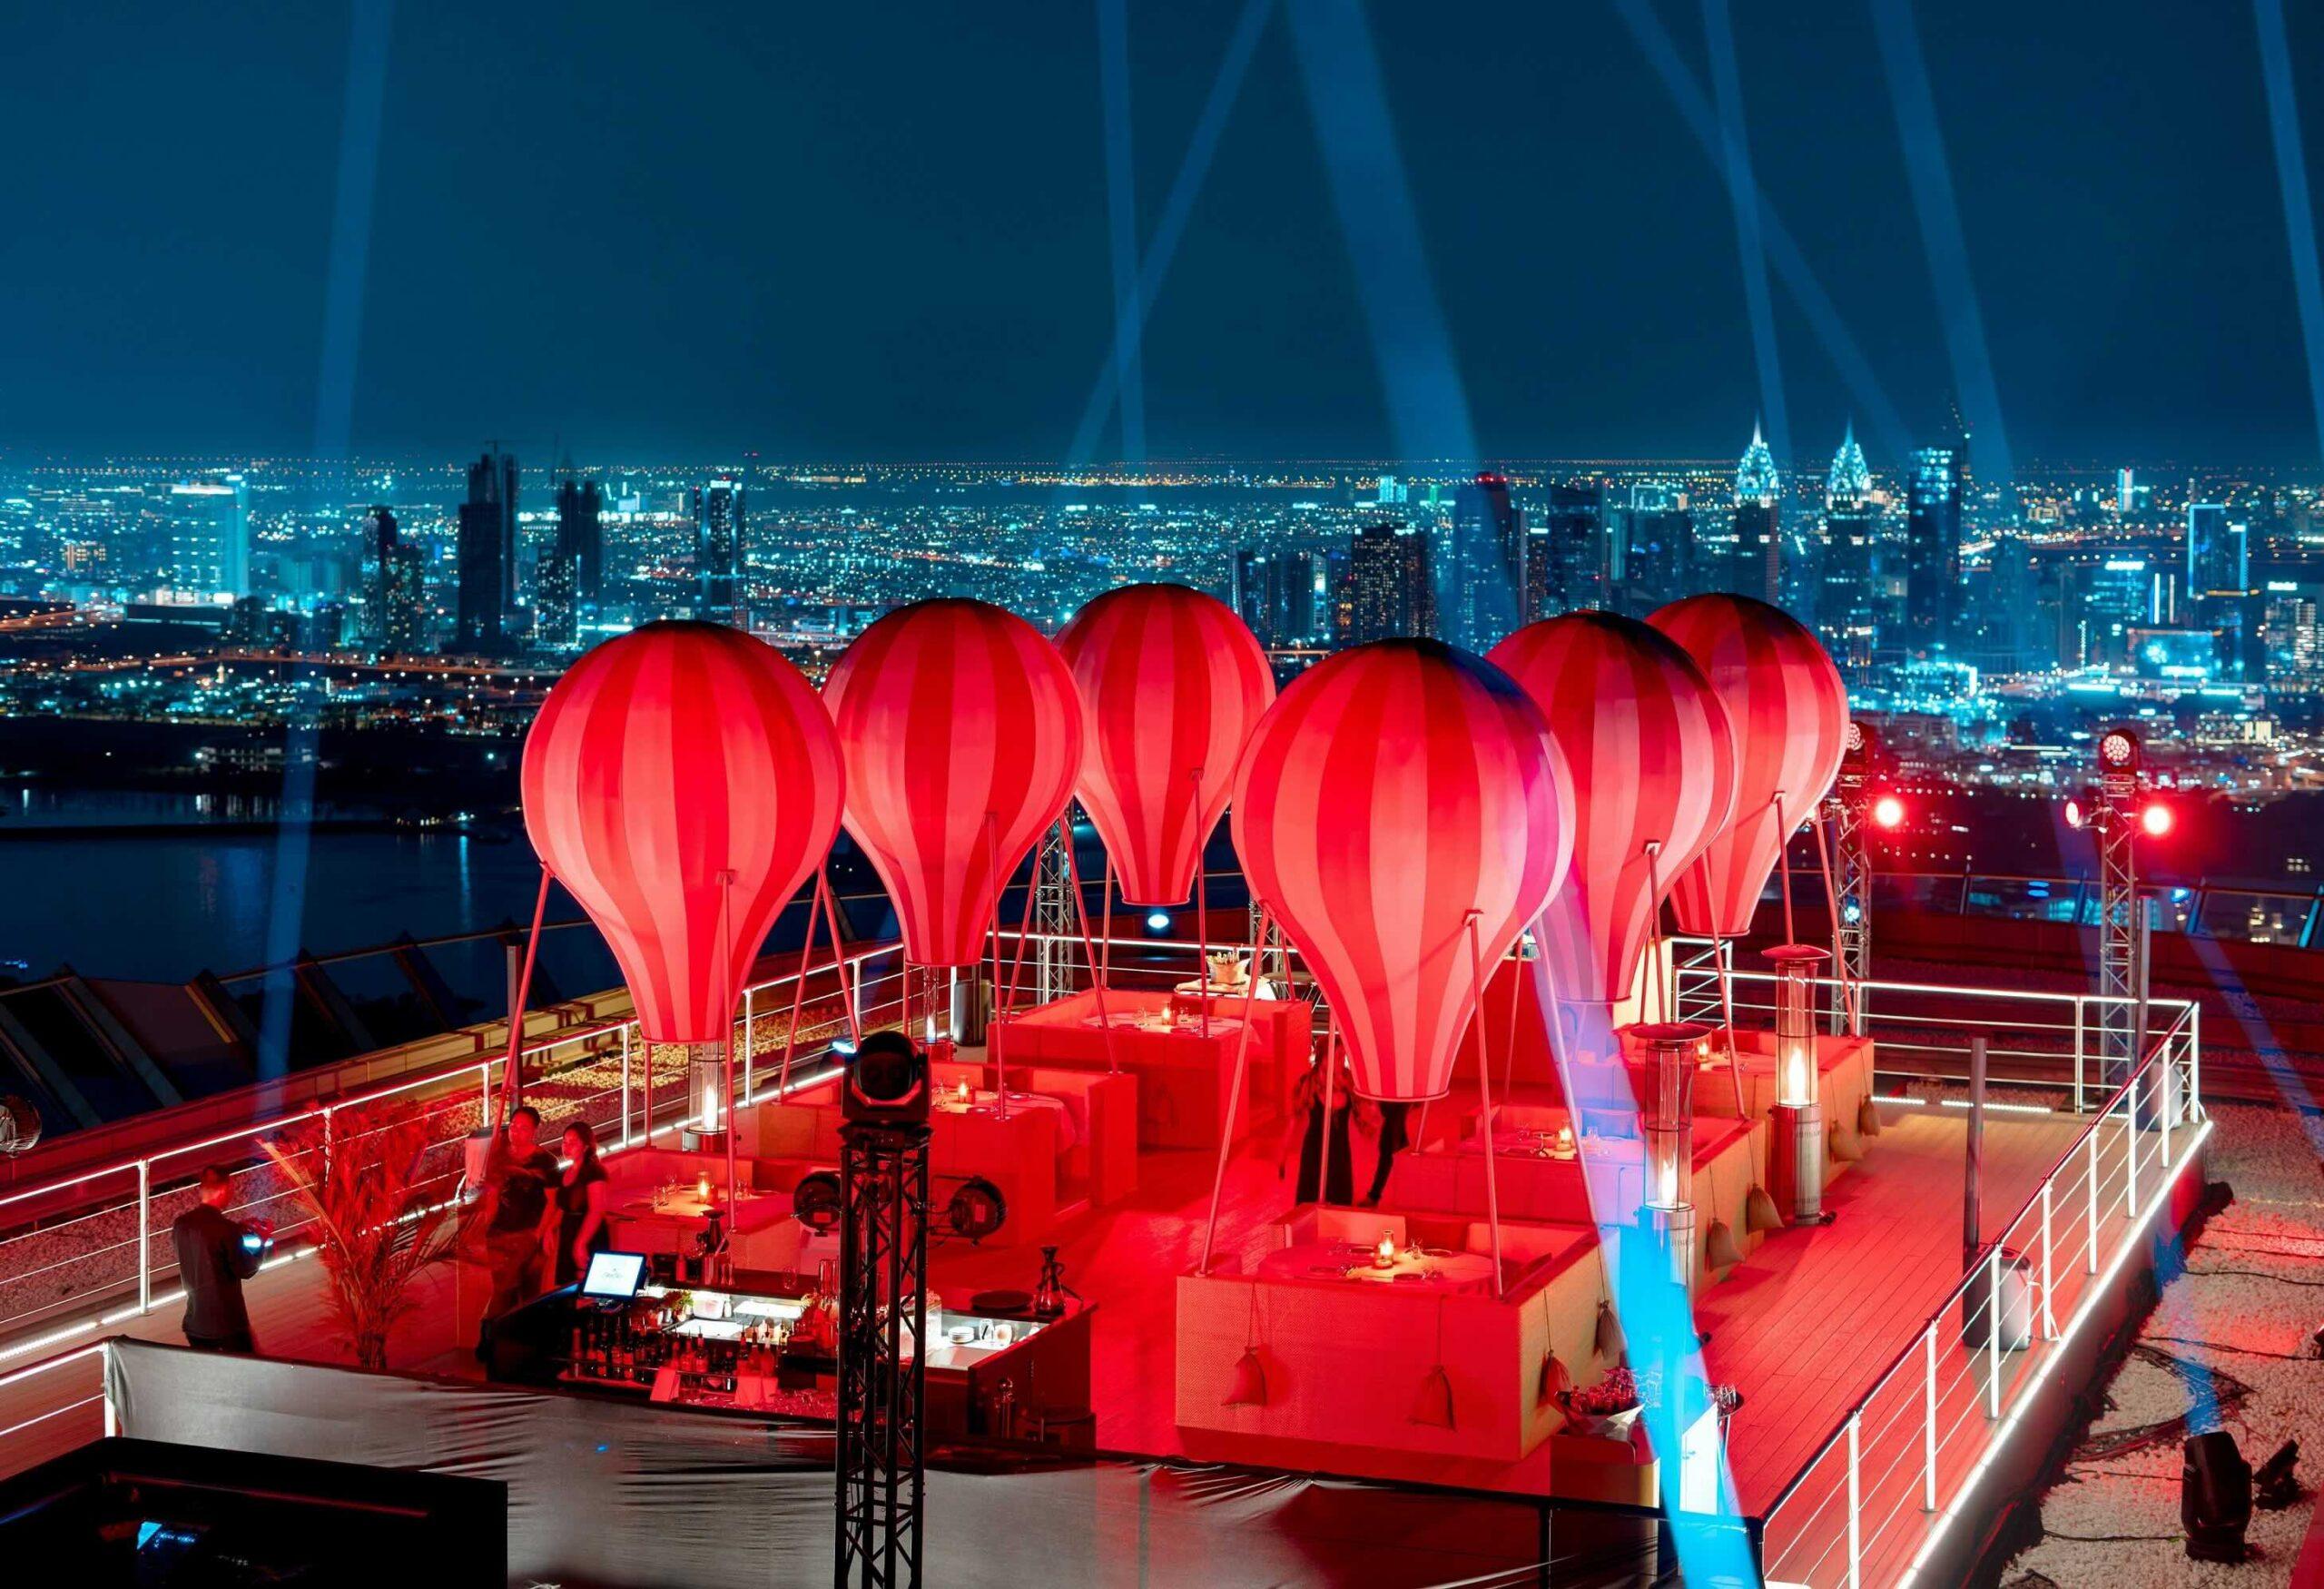 A hot air balloon dining experience is taking off in Dubai -image